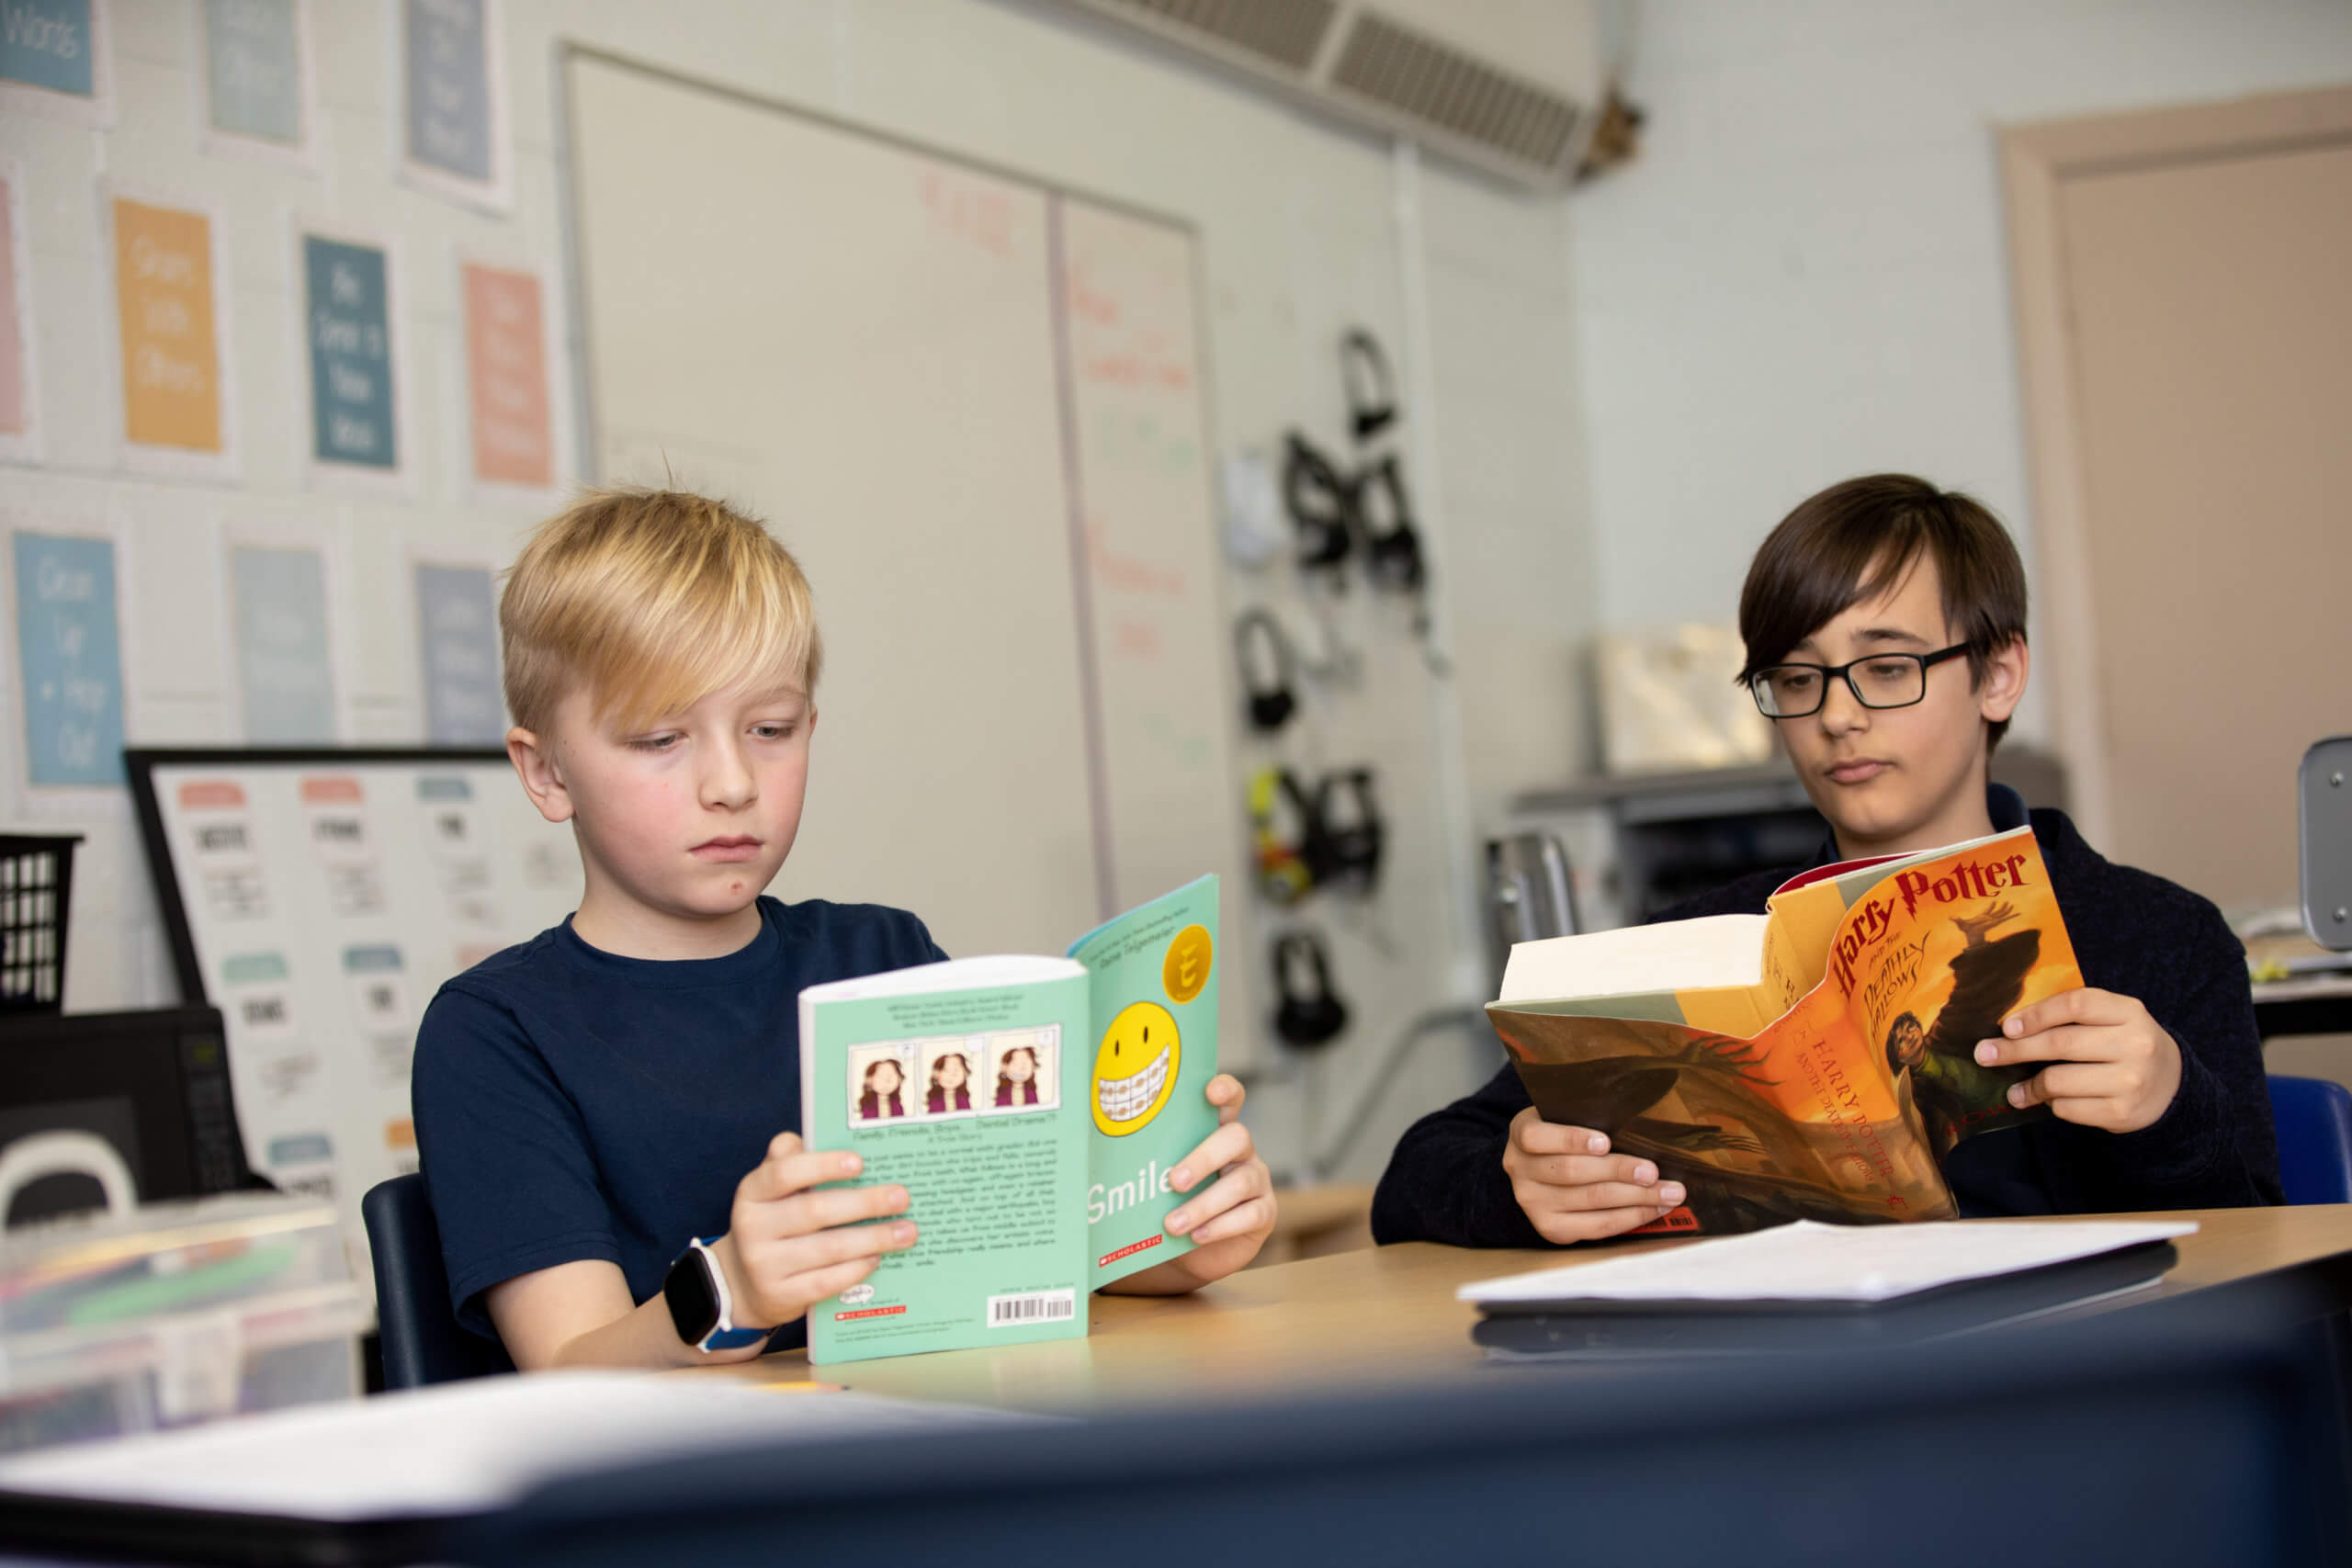 Two young MMAEC Students read through their favorite fiction in the classroom together.